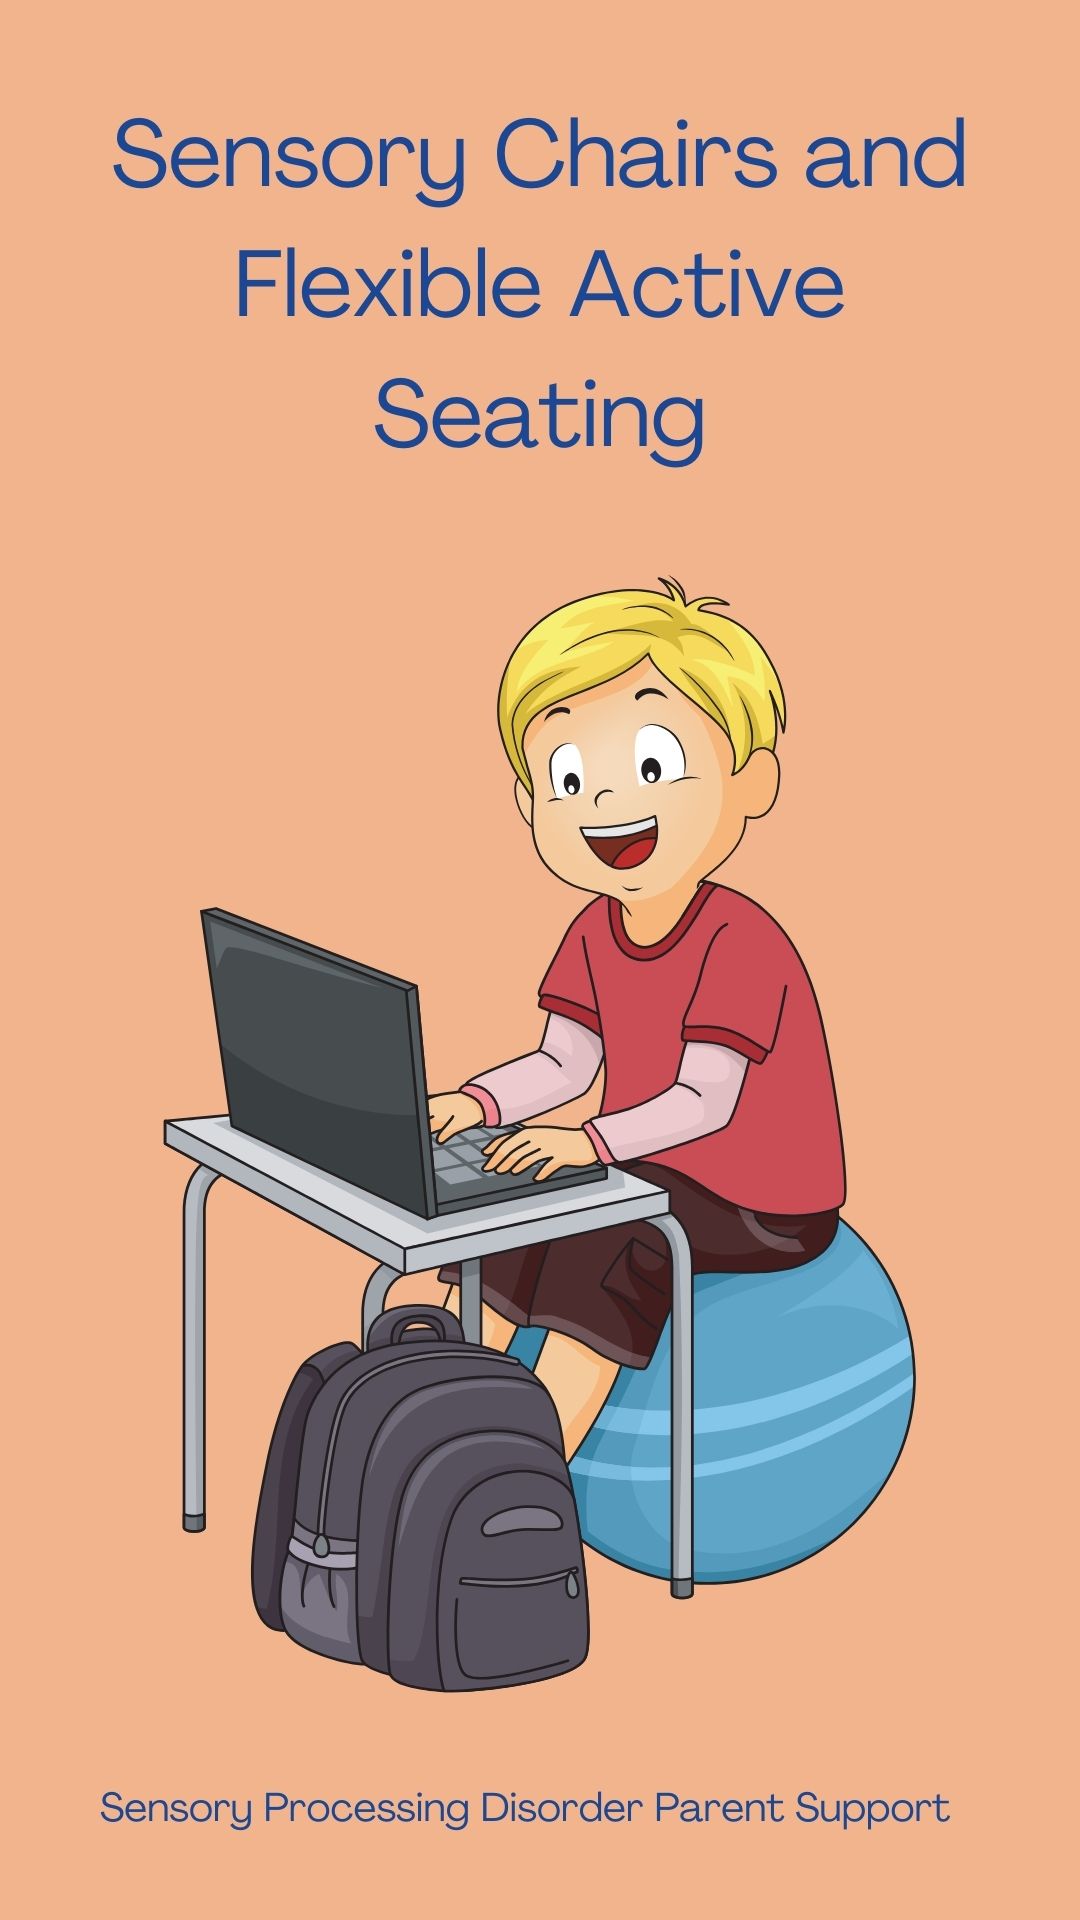 Sensory Chairs and Flexible Active Seating